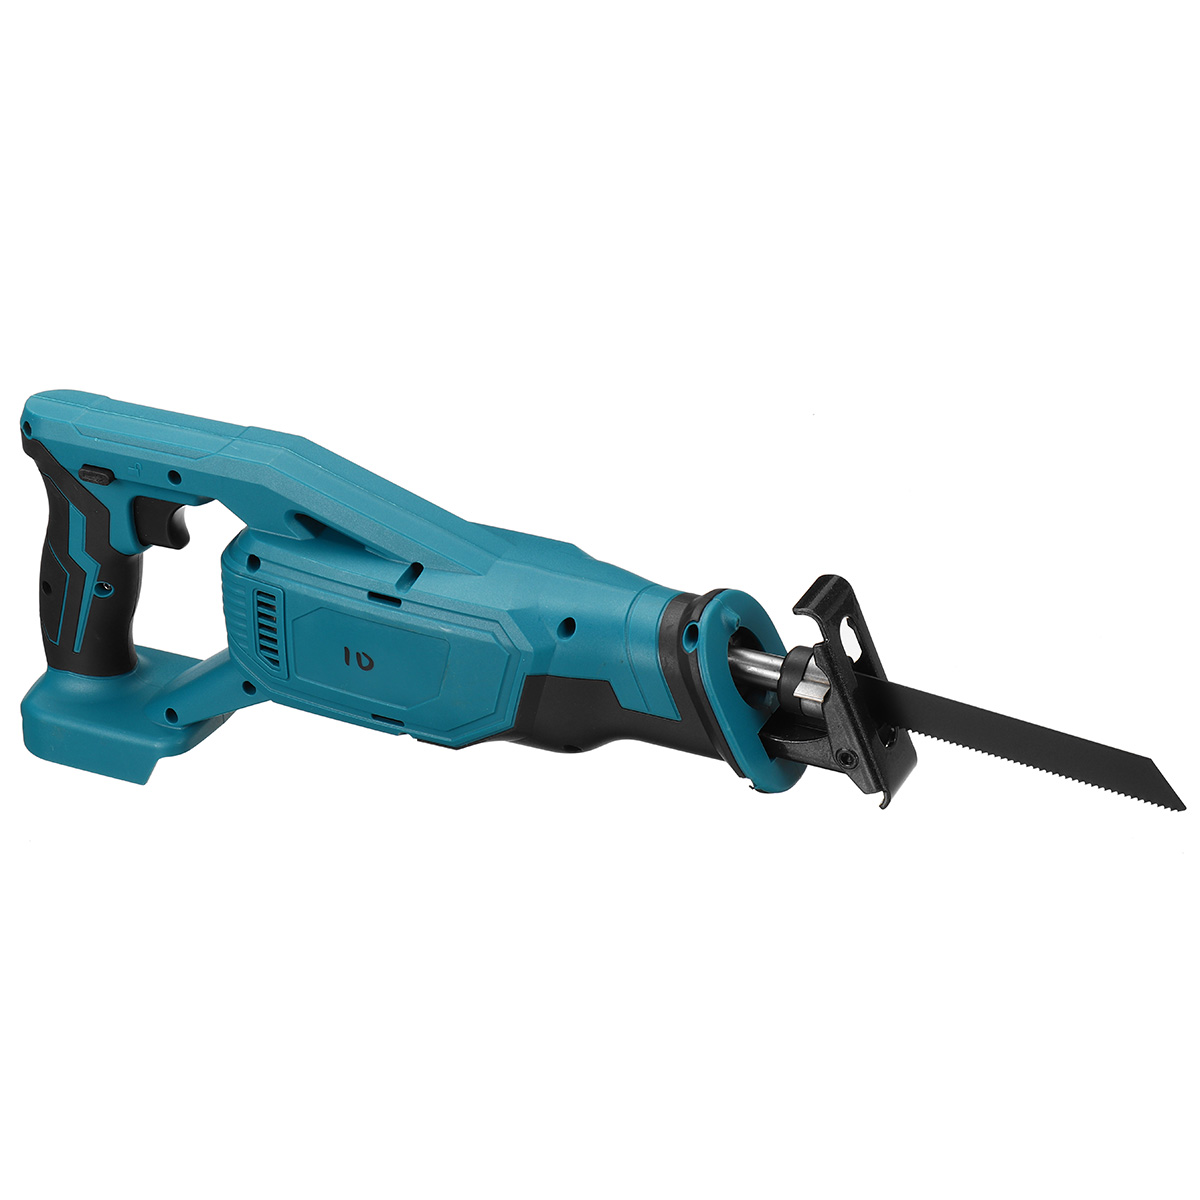 18V-Blue-Electric-Reciprocating-Saw-Variable-Speed-Cordless-Wood-Metal-Cutting-Power-Tools-Set-1716396-6